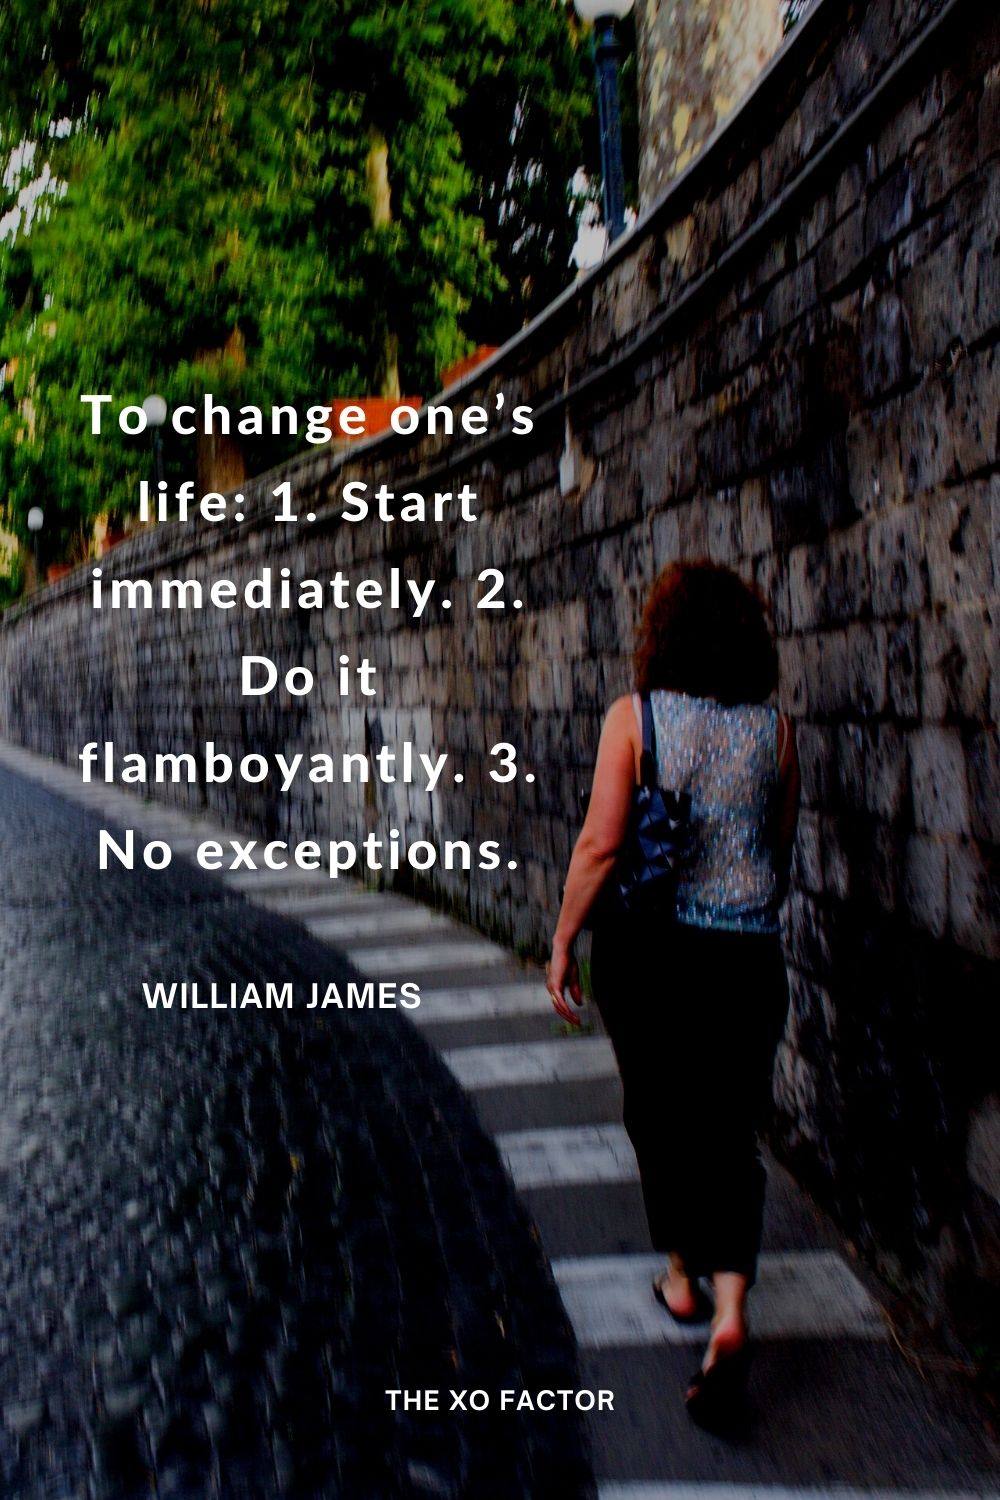 To change one’s life: 1. Start immediately. 2. Do it flamboyantly. 3. No exceptions.